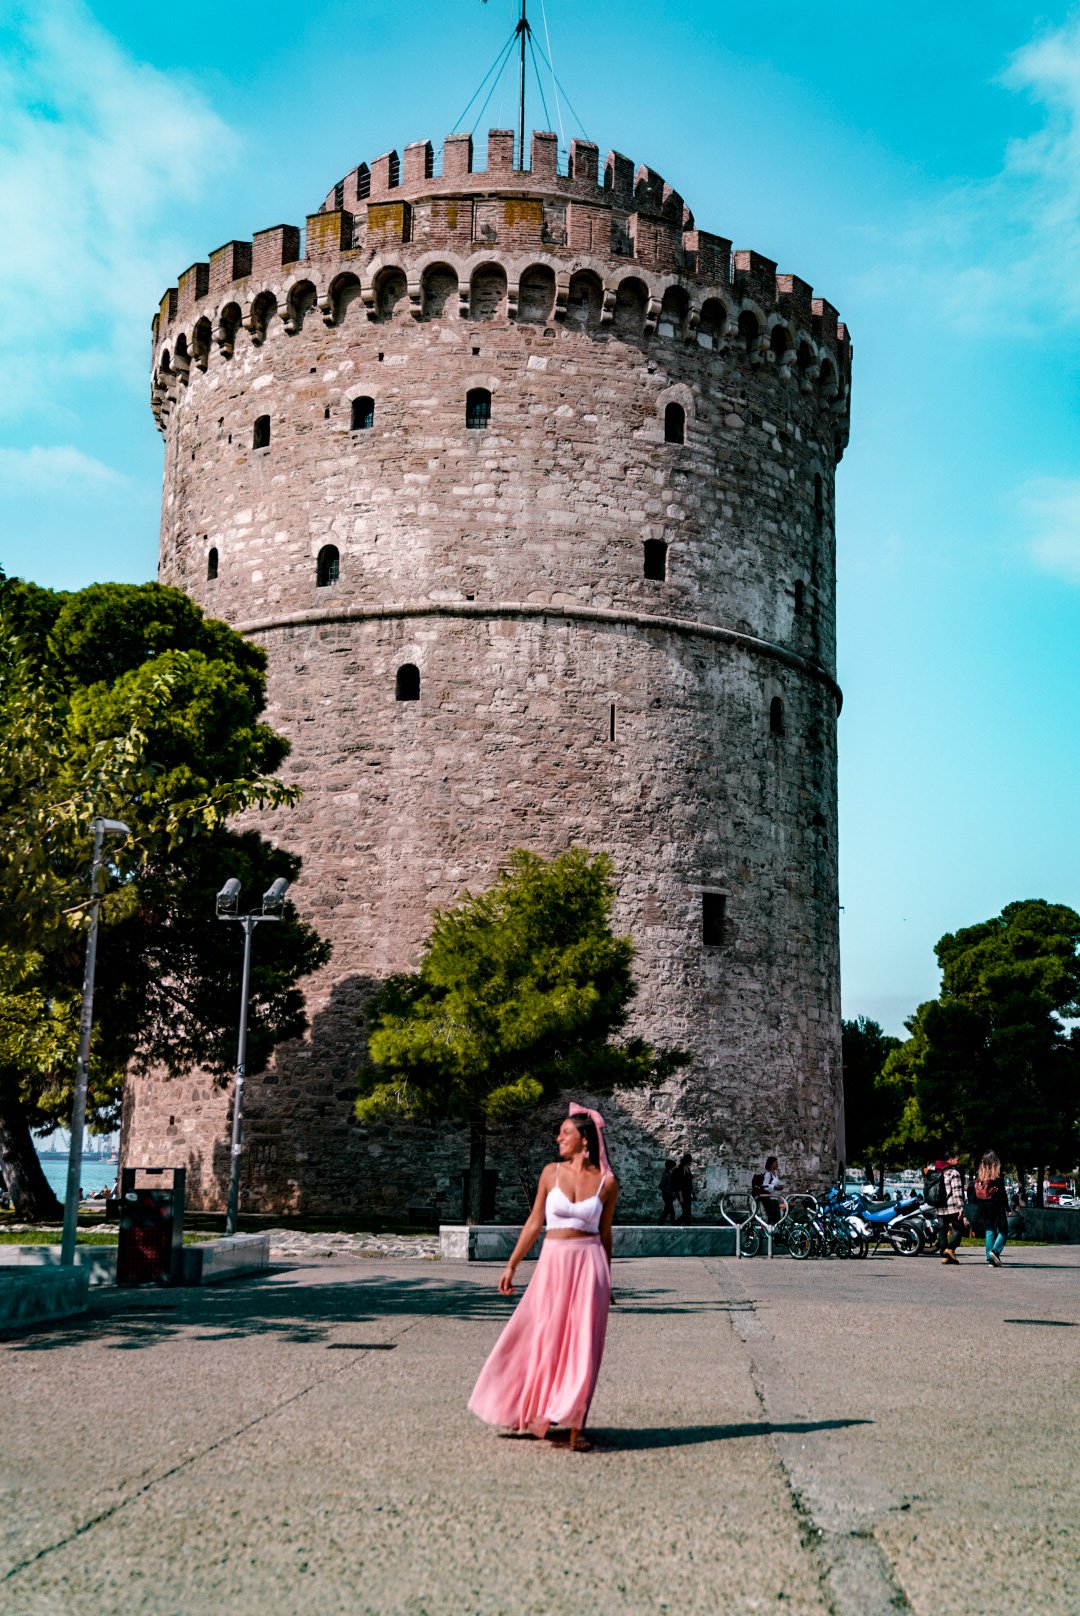 The White Tower in Thessaloniki Greece